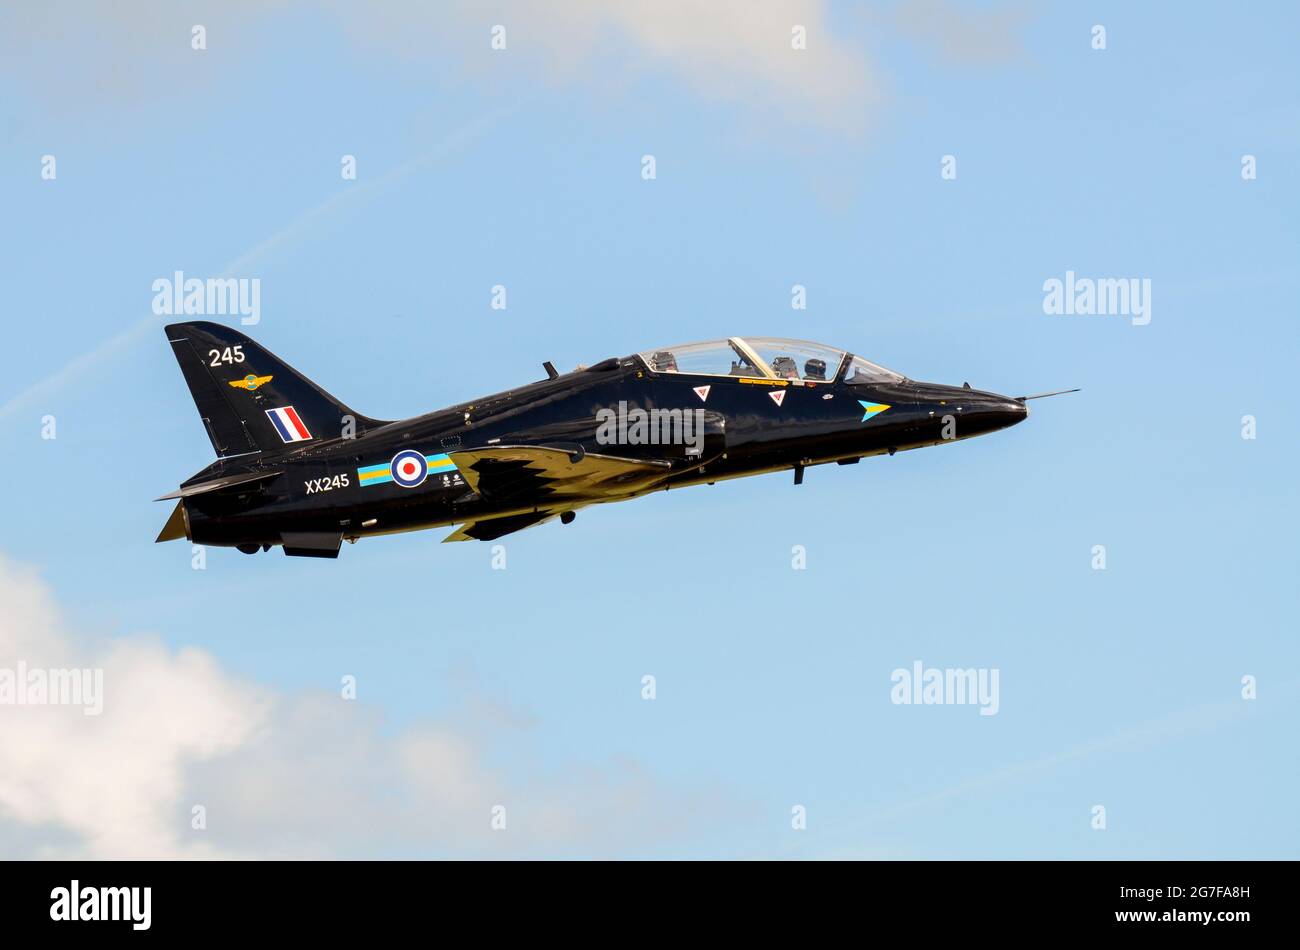 Royal Air Force British Aerospace Hawk T1 jet trainer plane climbing after take off. RAF 208 Squadron BAe Hawk T.1, part of 4 Flying Training School Stock Photo